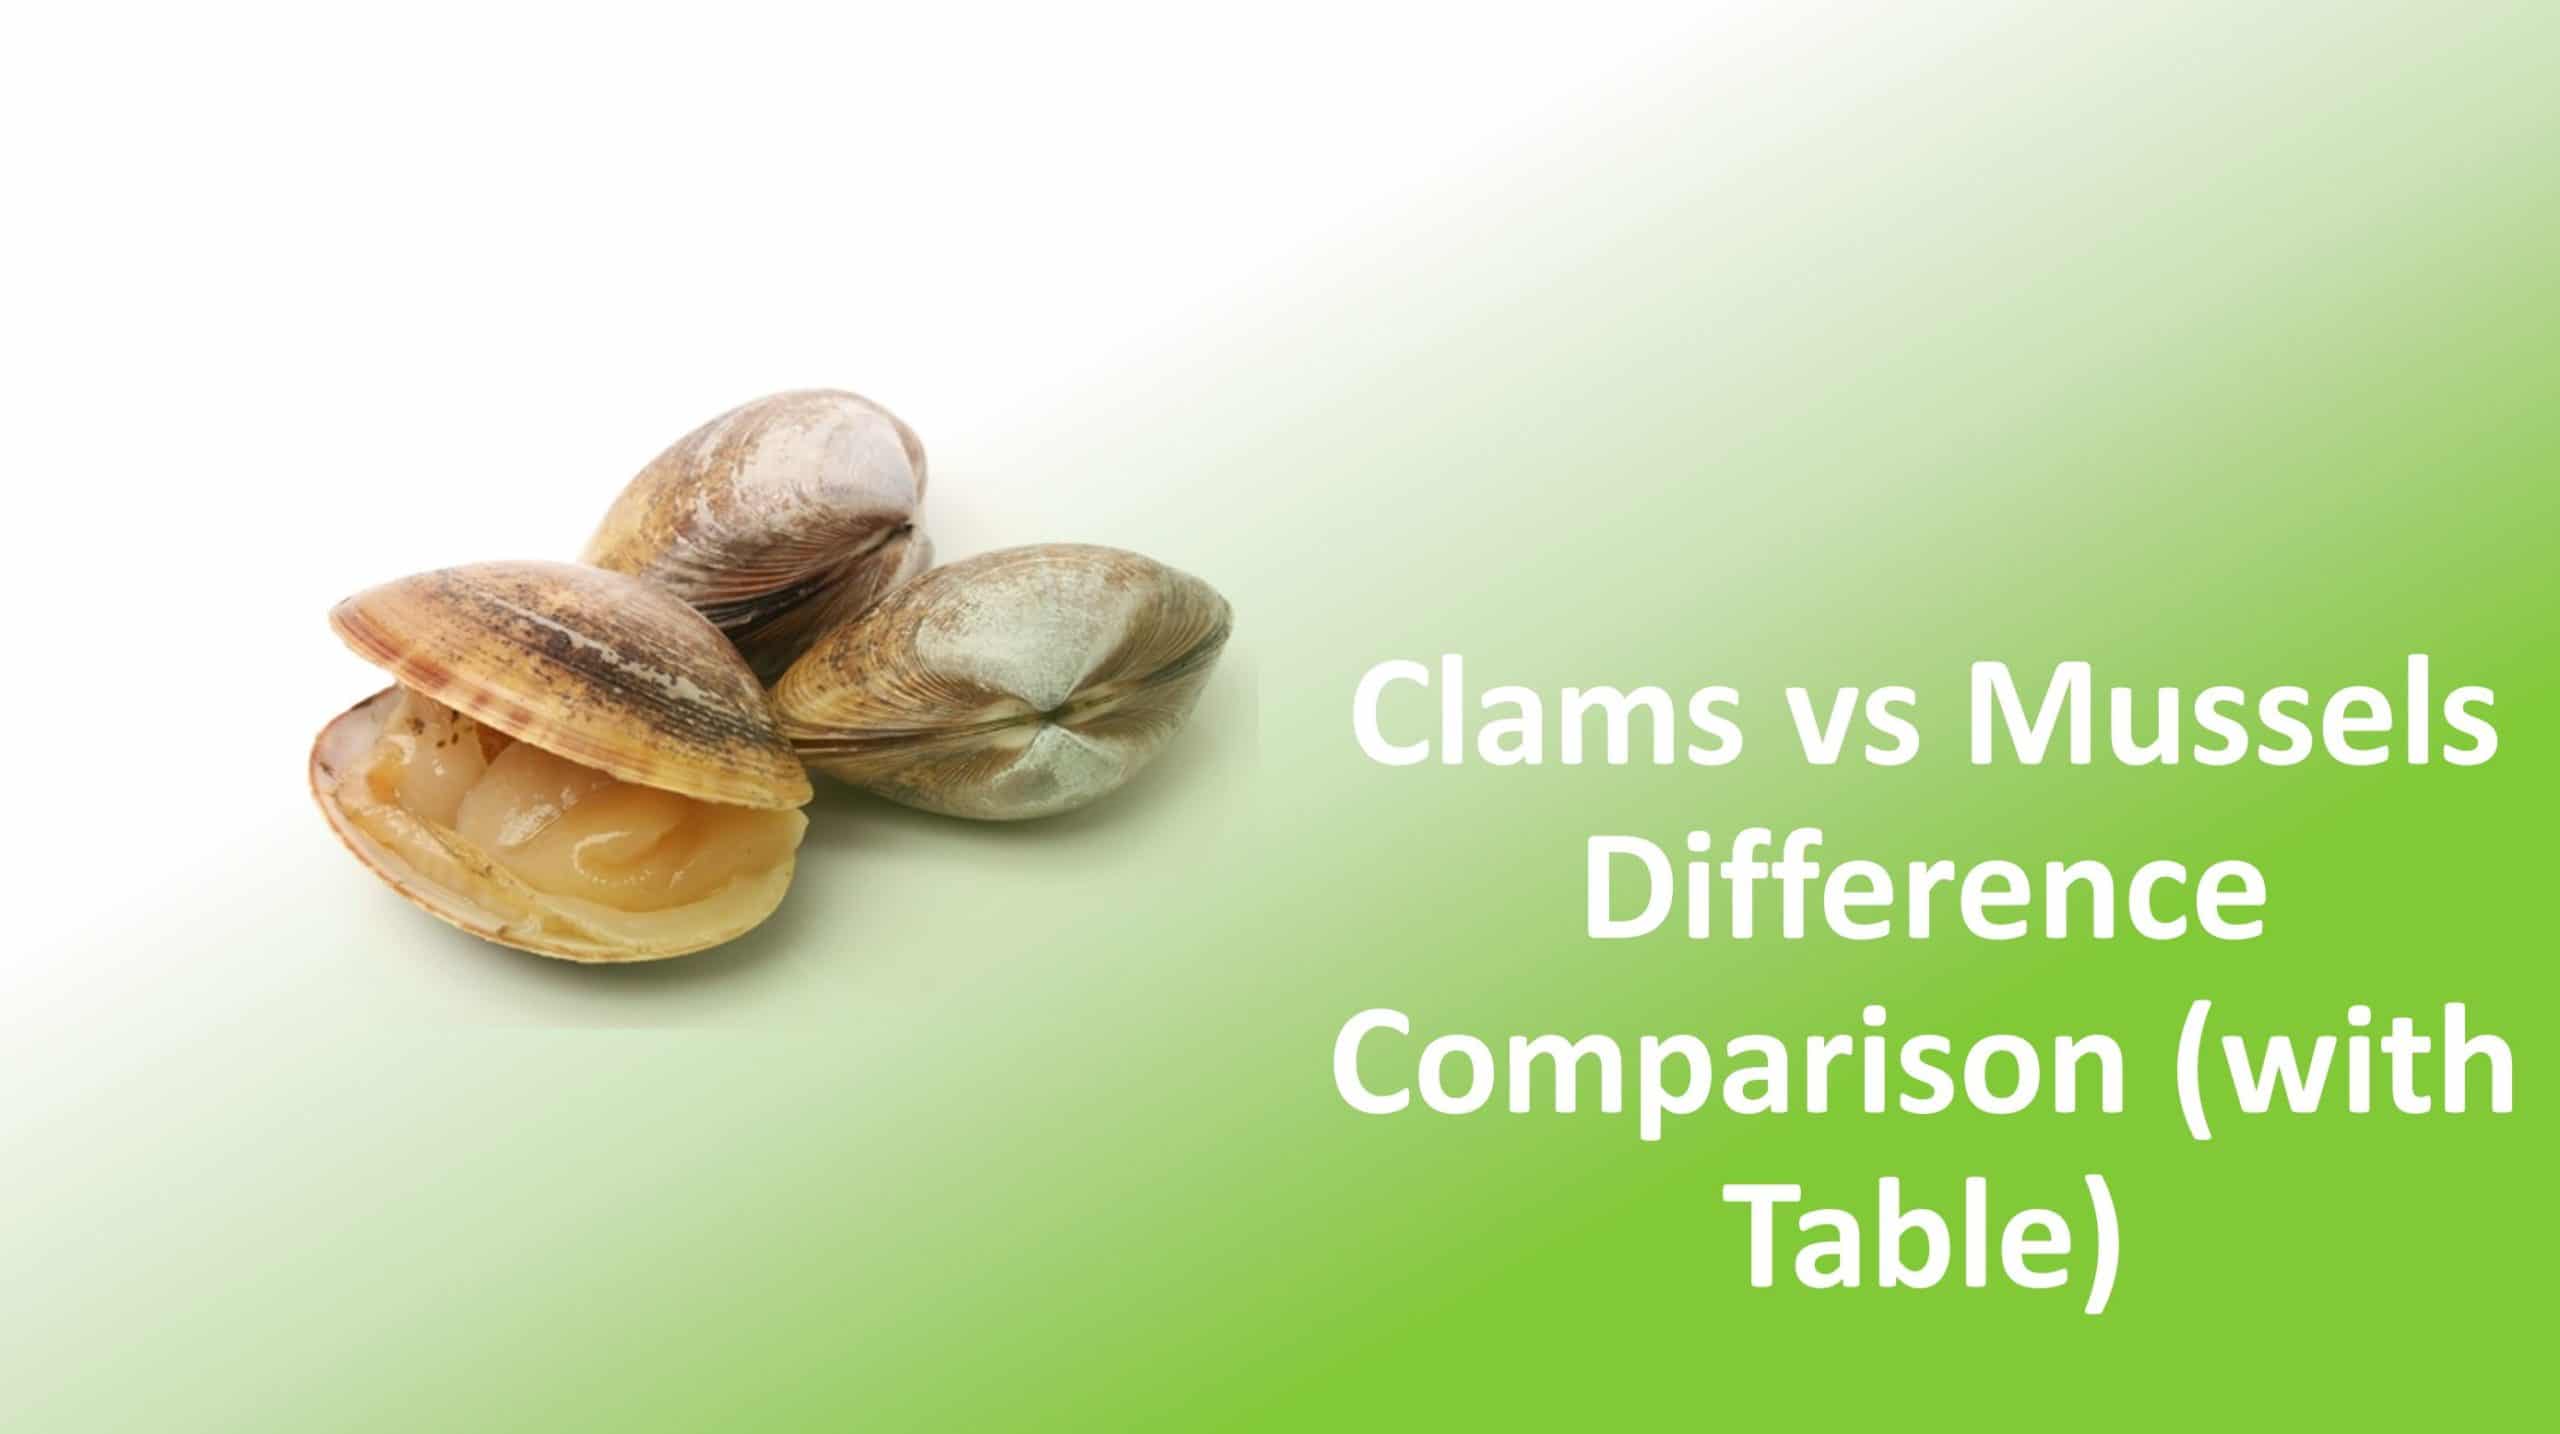 Clams vs Mussels Difference Comparison (With Table)